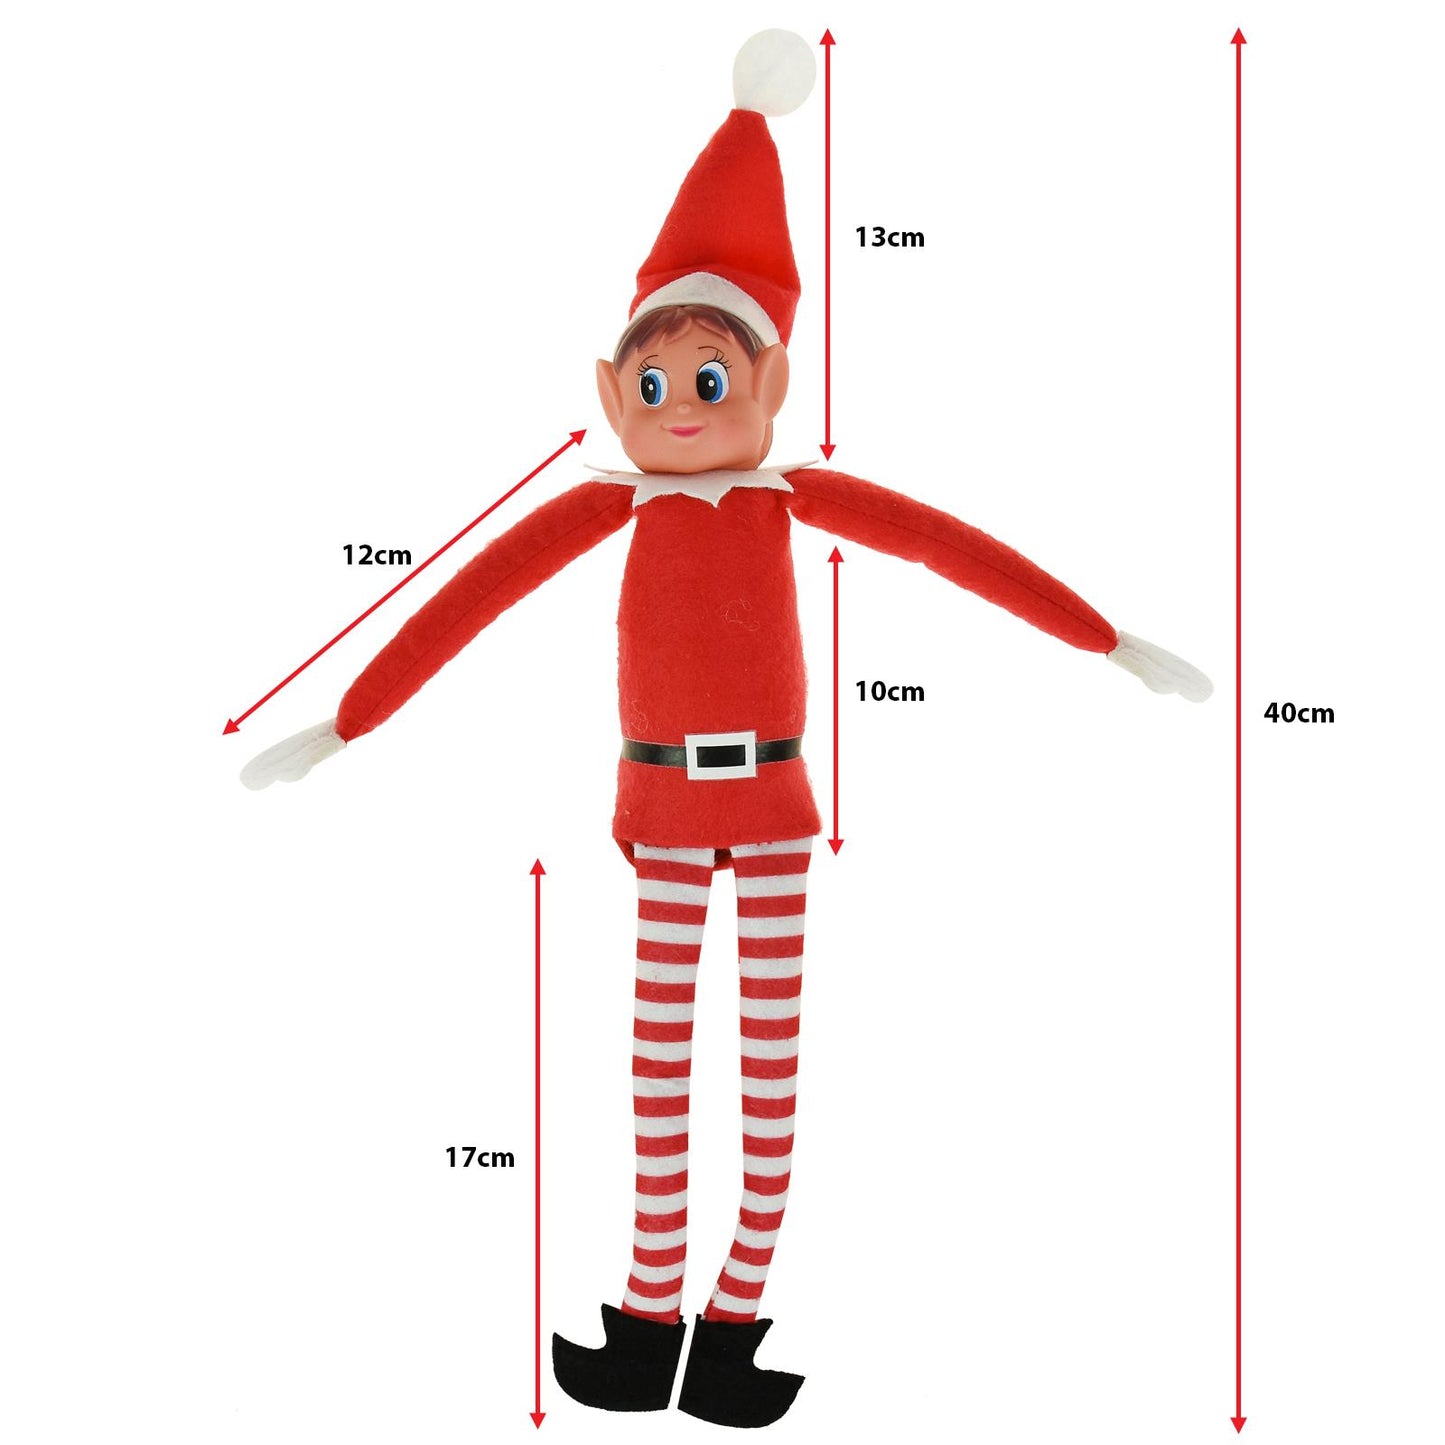 Novelty Plush Dolls Toy Xmas Elf Two-Pack Of Playful Christmas Elf Figurines